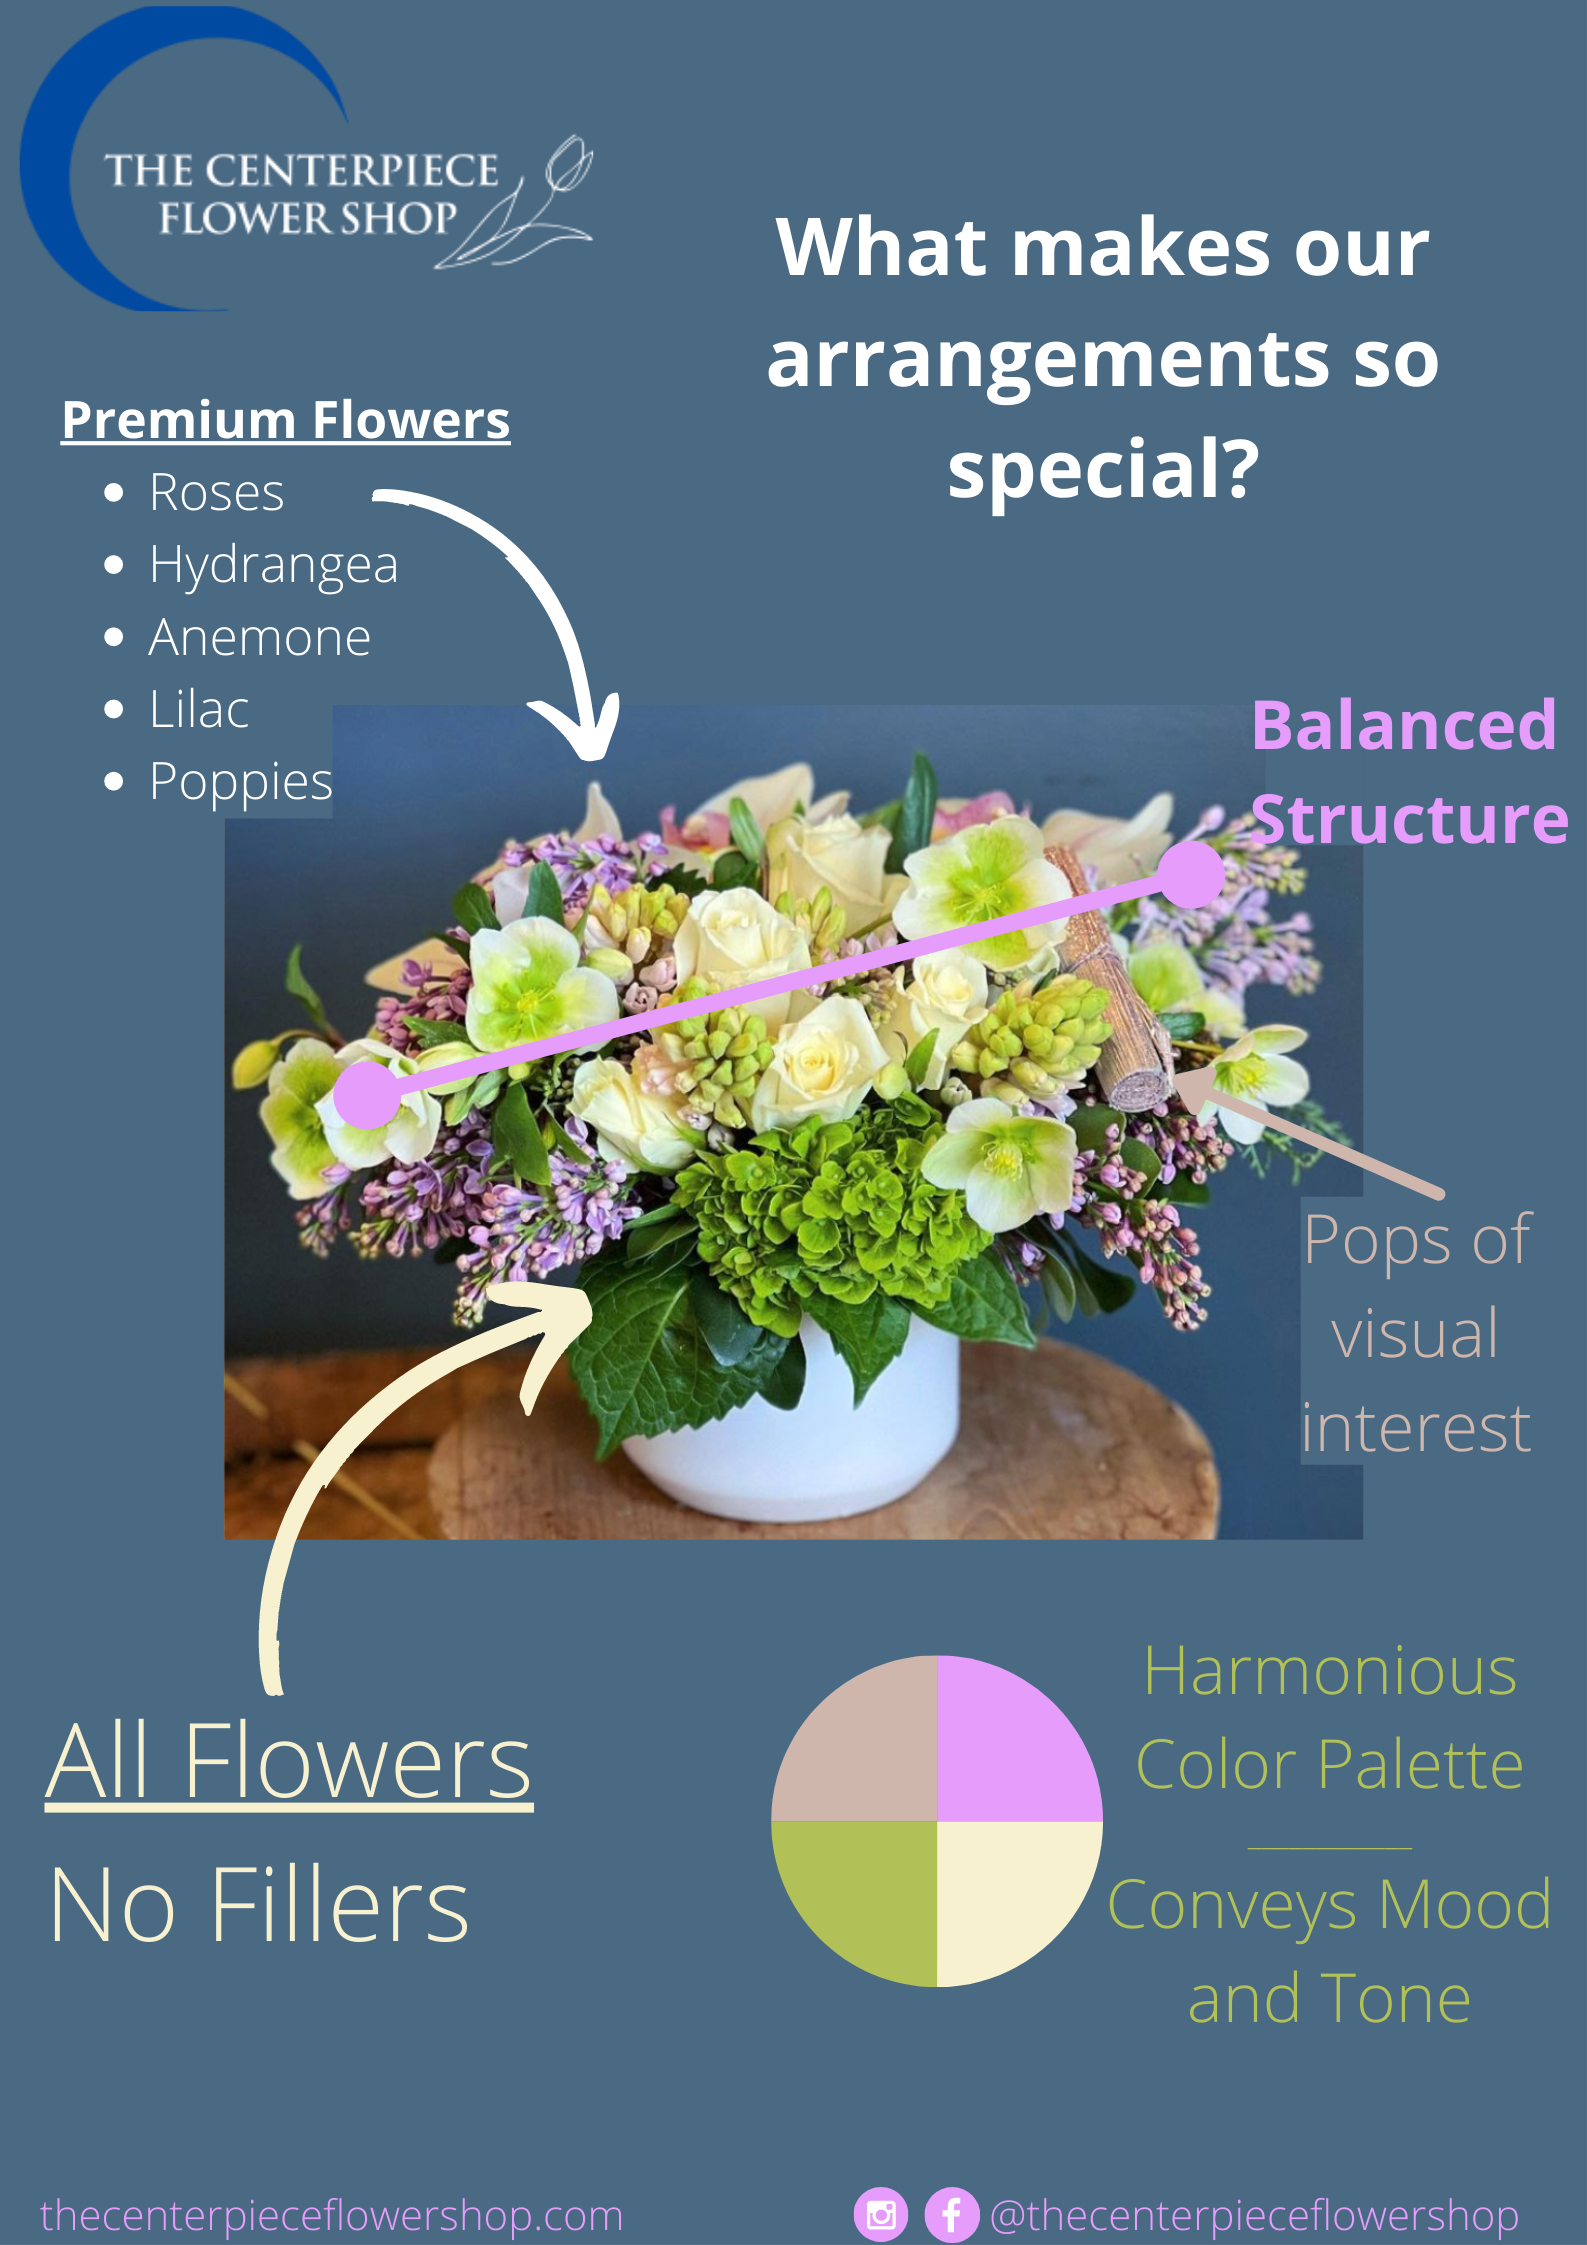 An informational graphic that points out just how the The Centerpiece's work stands above all other flower shops